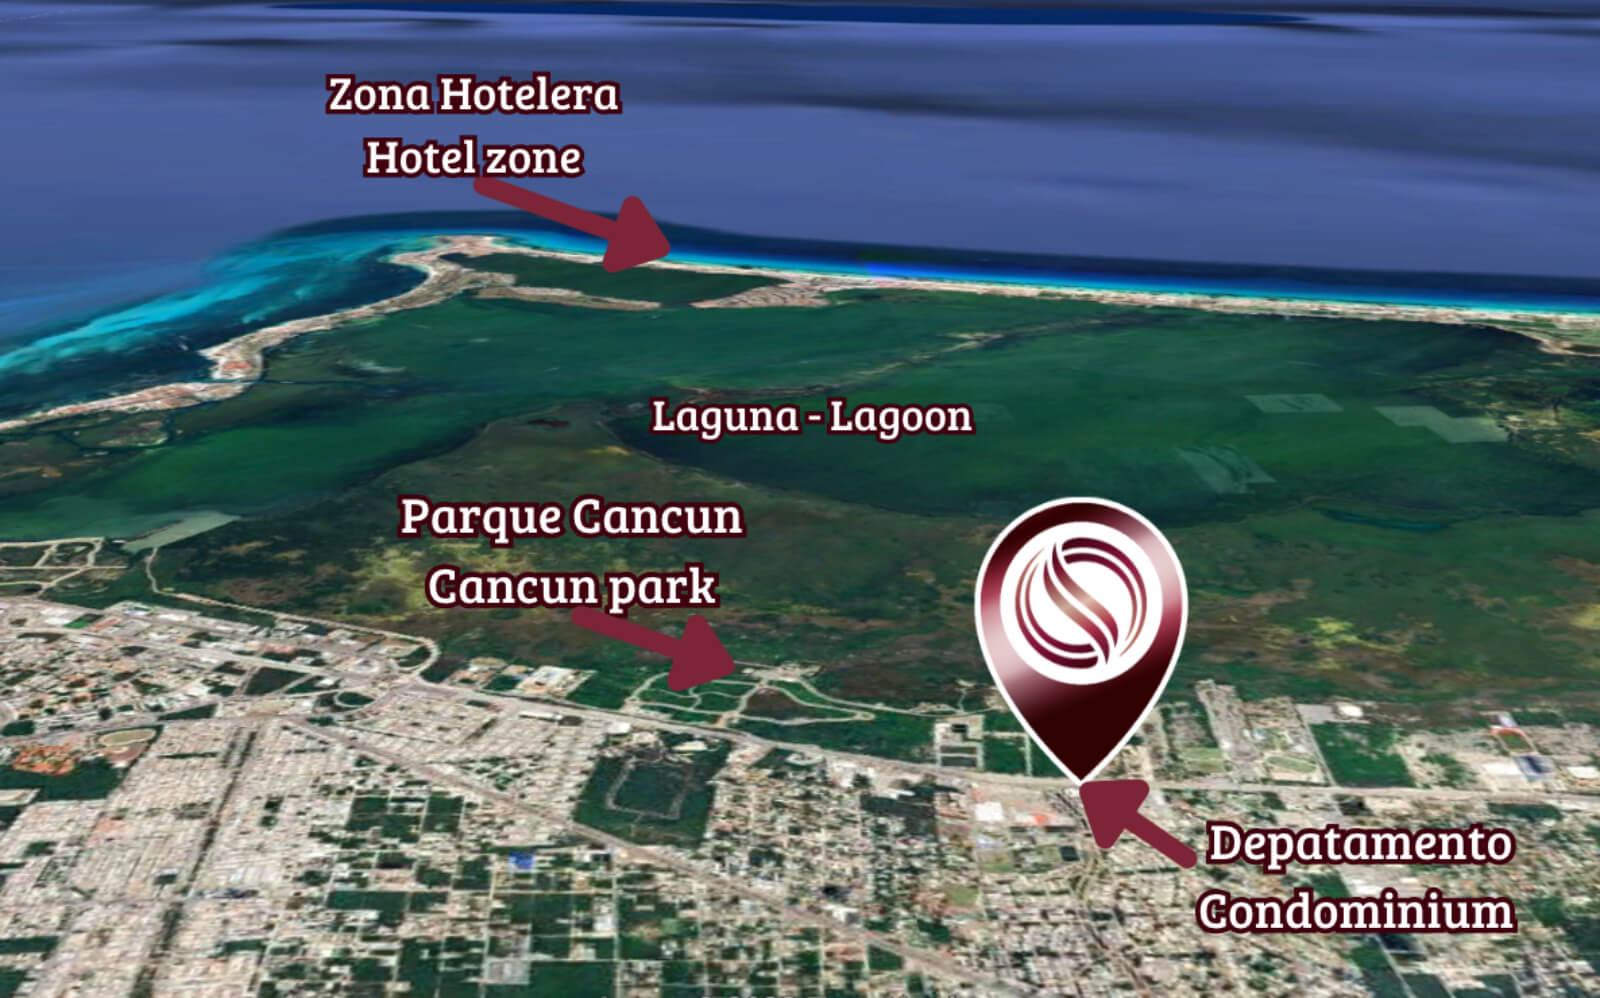 Condominium with security, pool and jacuzzi, pre-construction, for sale, Cancún.